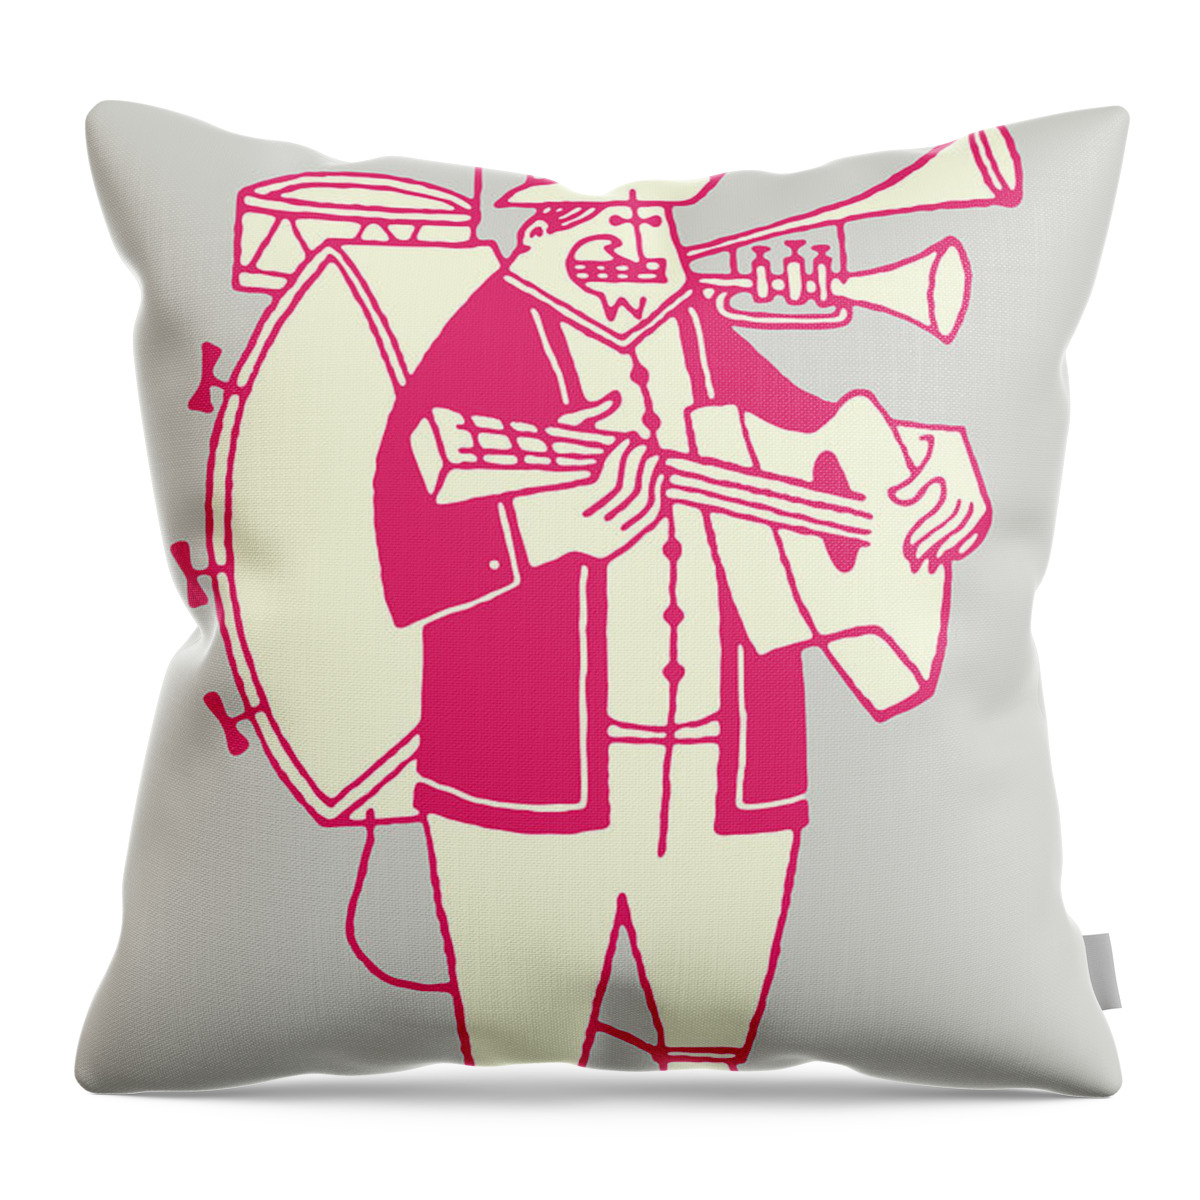 Adult Throw Pillow featuring the drawing One Man Band by CSA Images